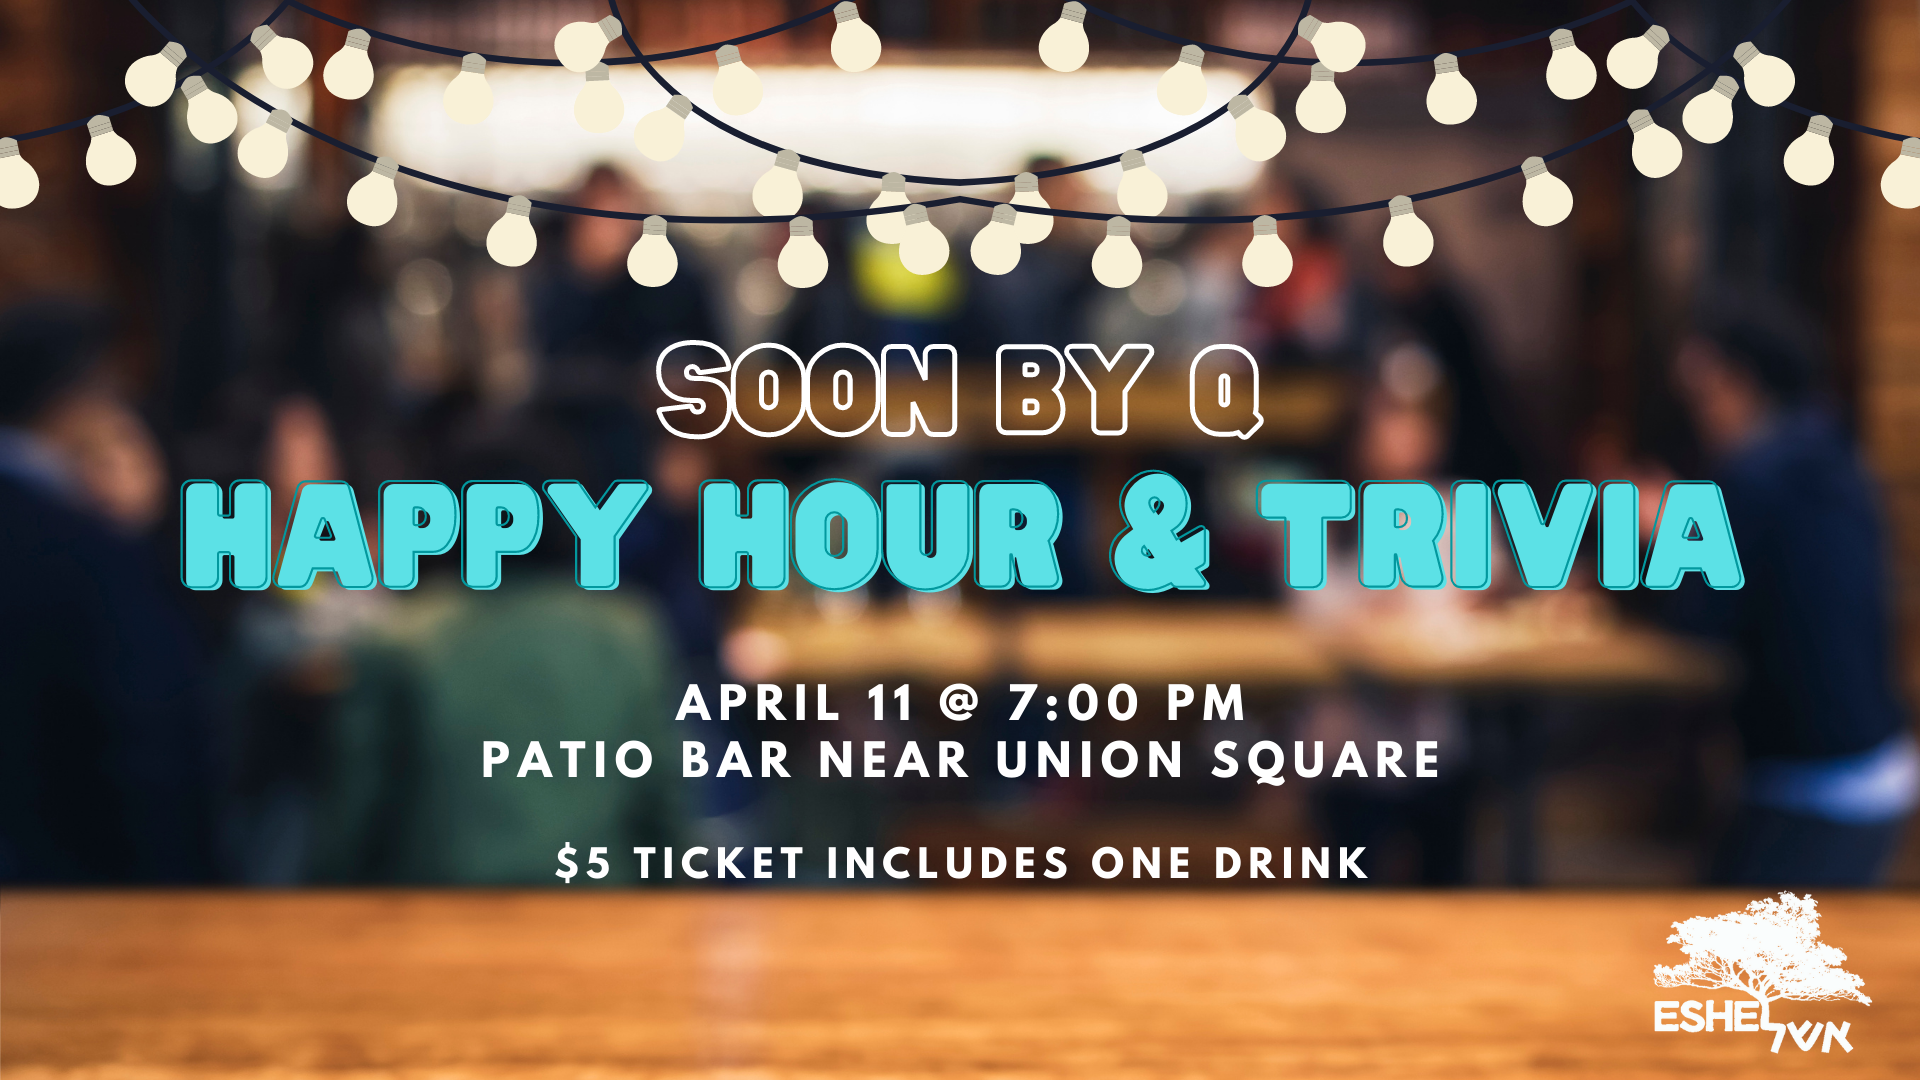 Soon by Q Happy Hour & Bar Trivia | April 11 @ 7:00 PM, Patio Bar near Union Square, $5 Ticket includes one drink